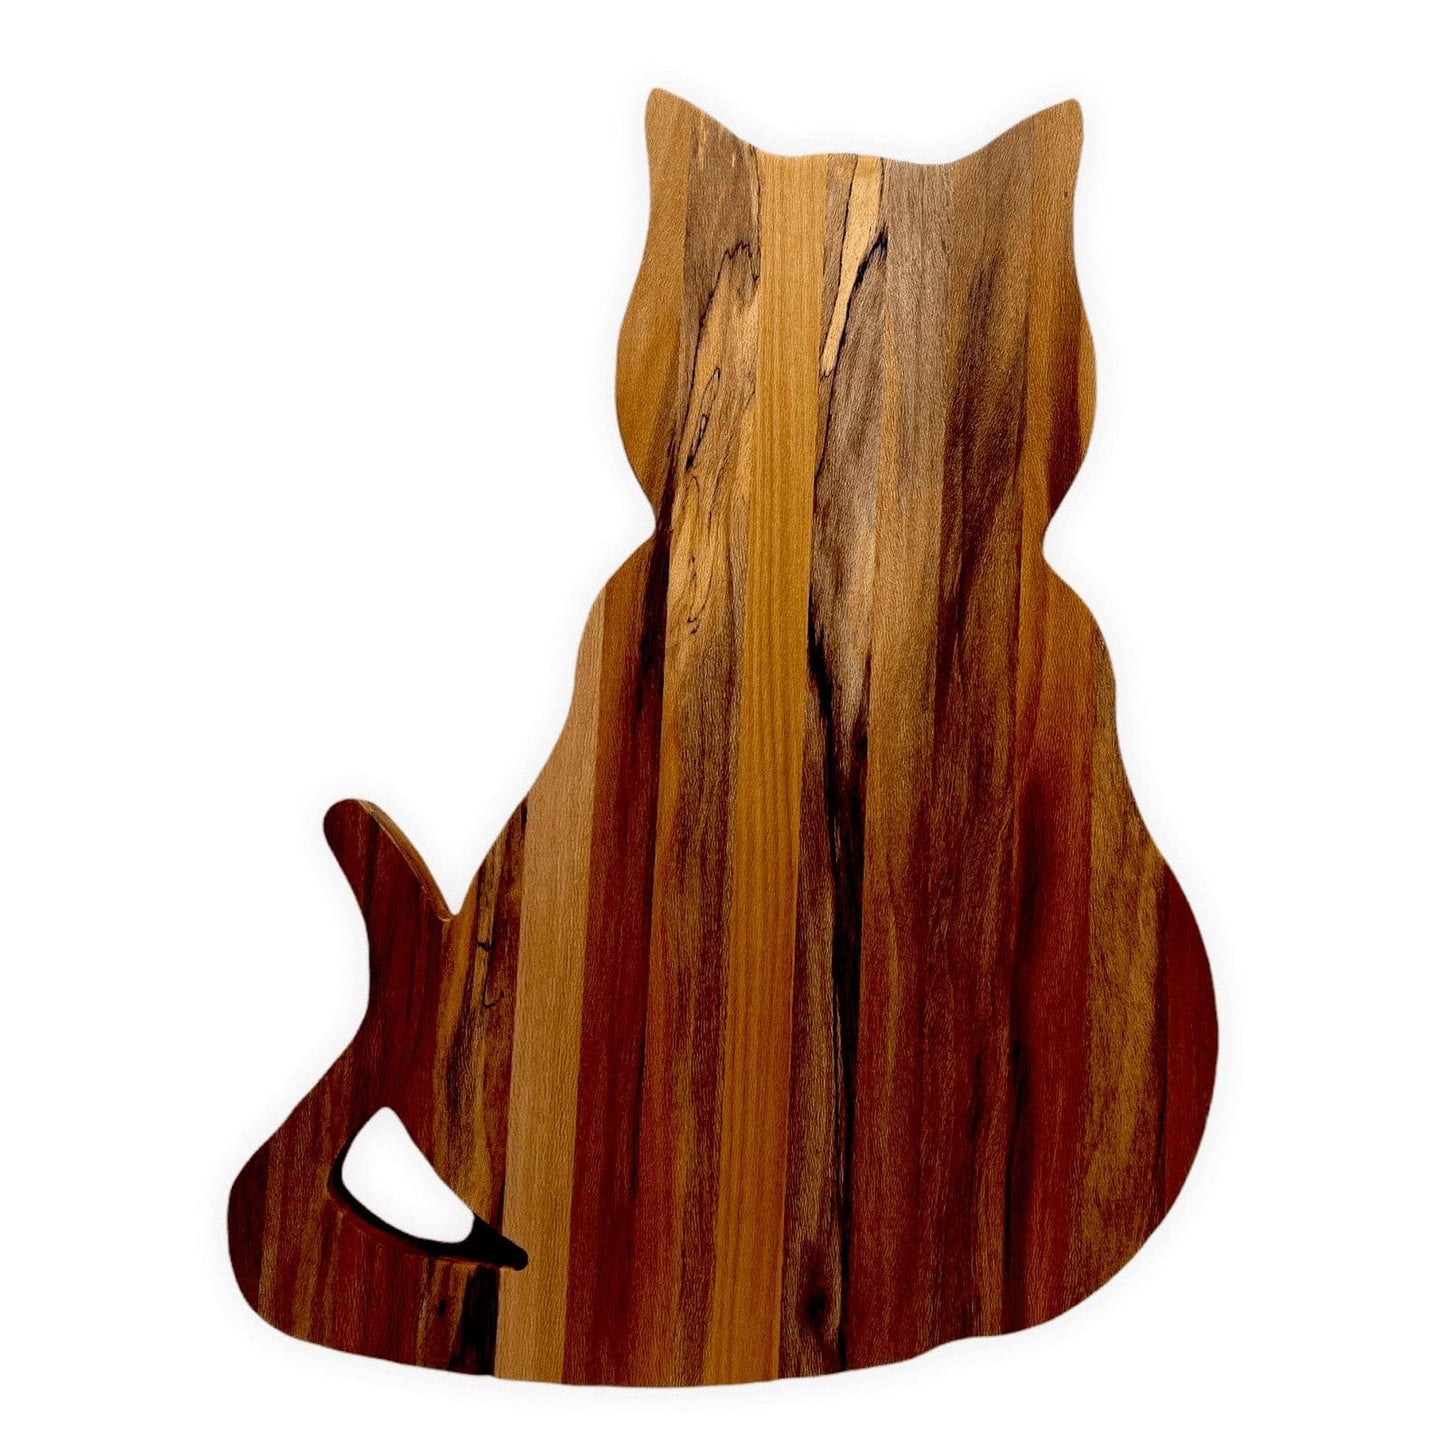 Cat Shaped Charcuterie Board - Heirloom Cat Shaped American Beech CharCATerie Board Looking Up, LLC